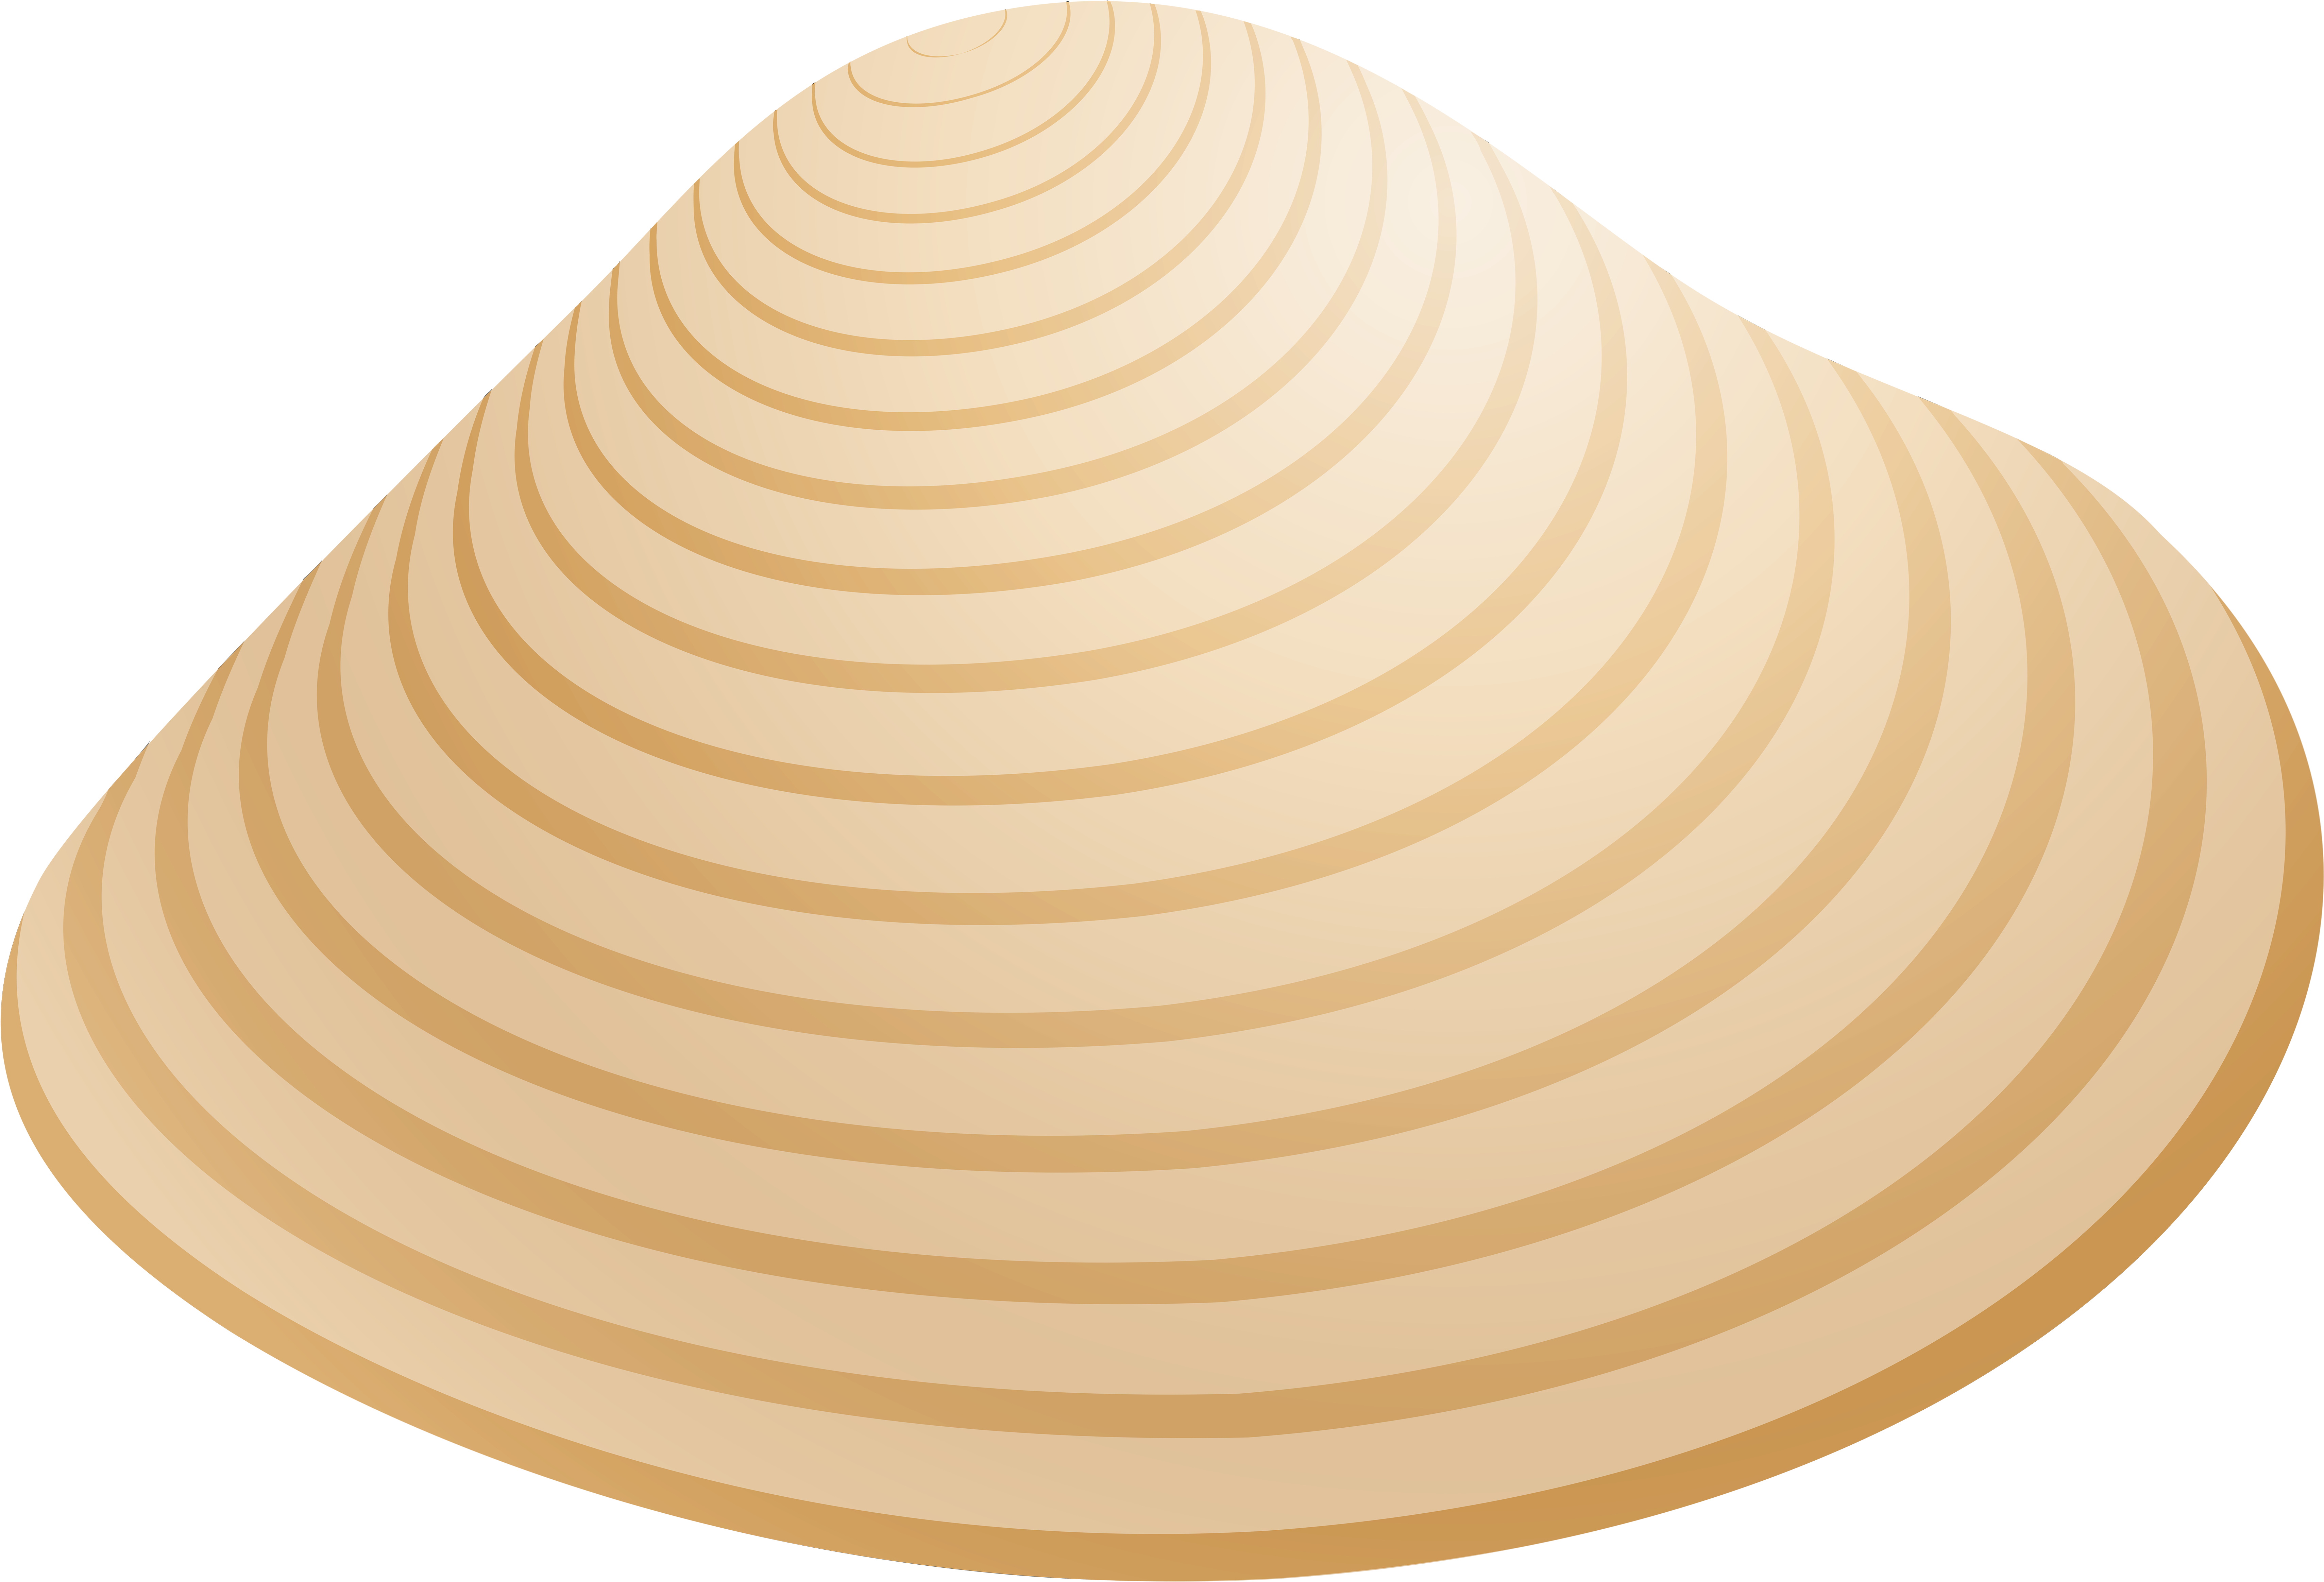 Shell Clipart Clam - Baltic Clam (7000x4812)